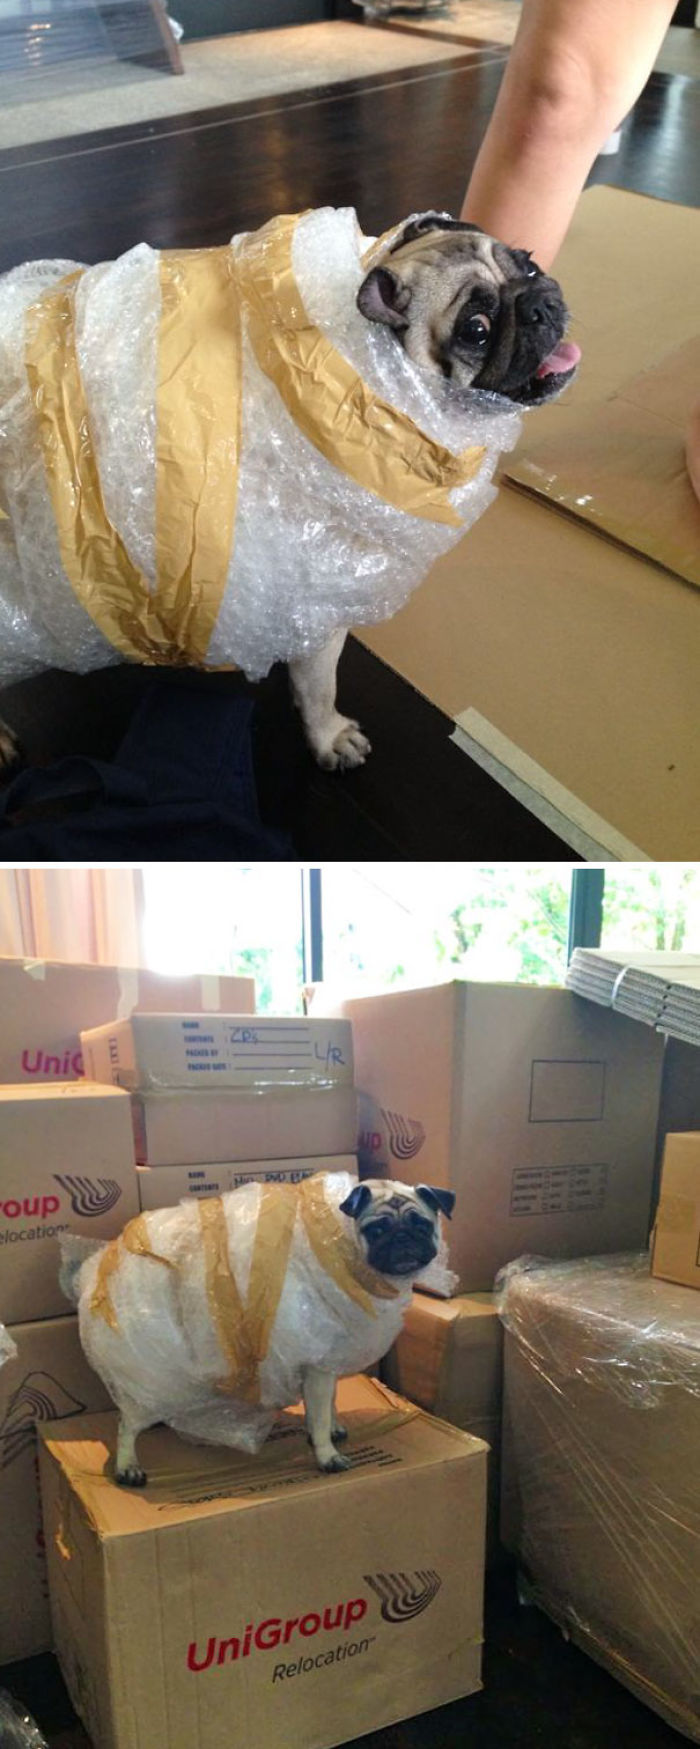 My Girlfriend Is Moving House, She Left Her Sister Alone And Then This Happened